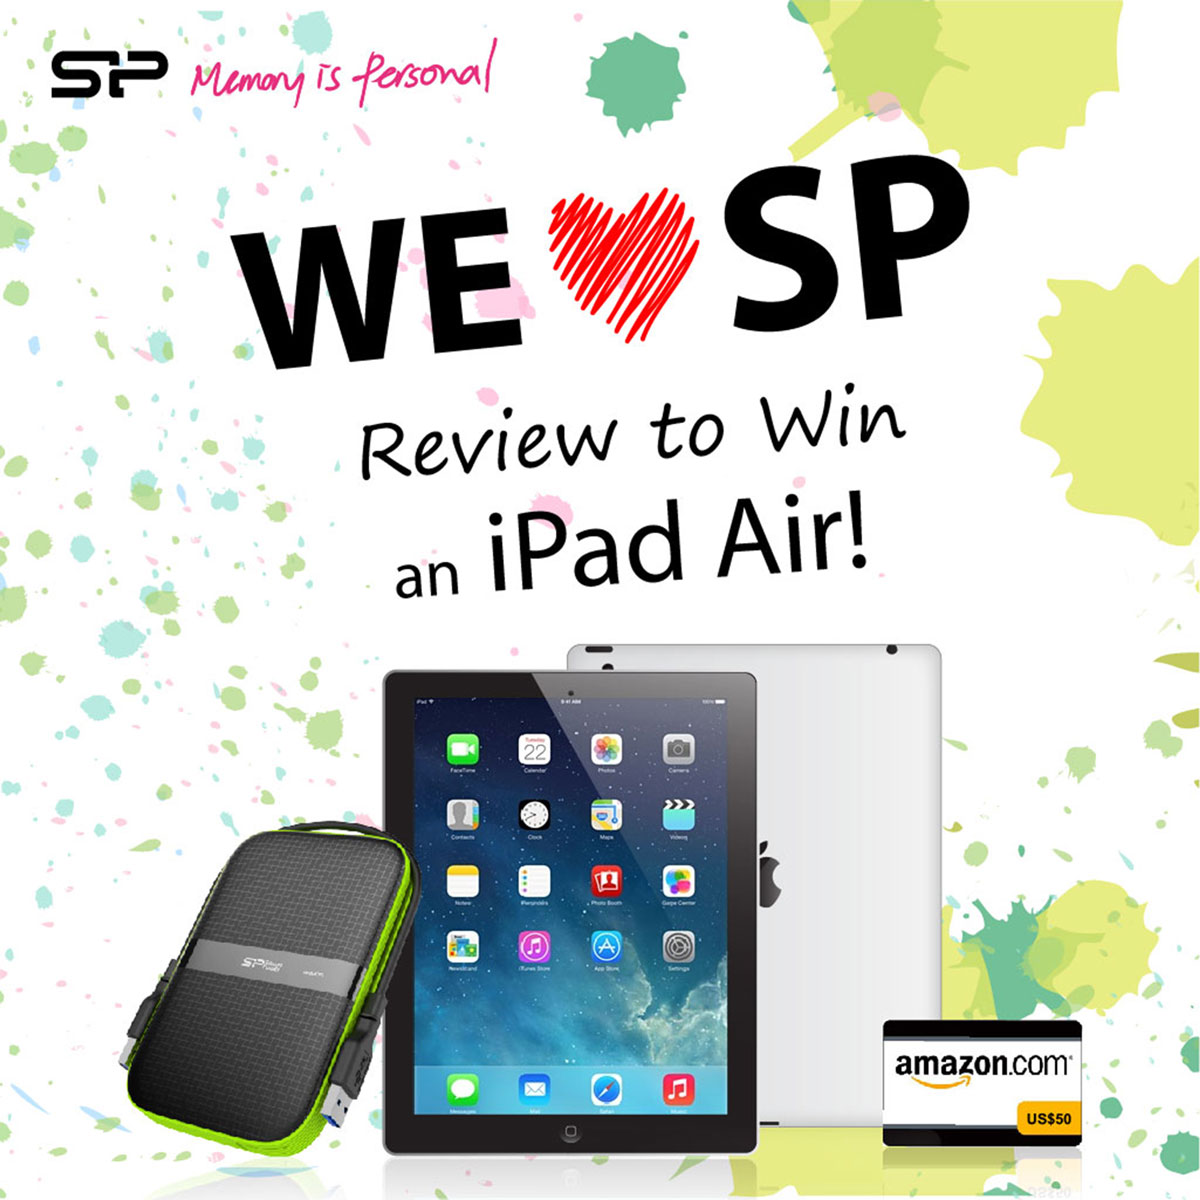 Contest Alert: Win An iPad Air with SP!